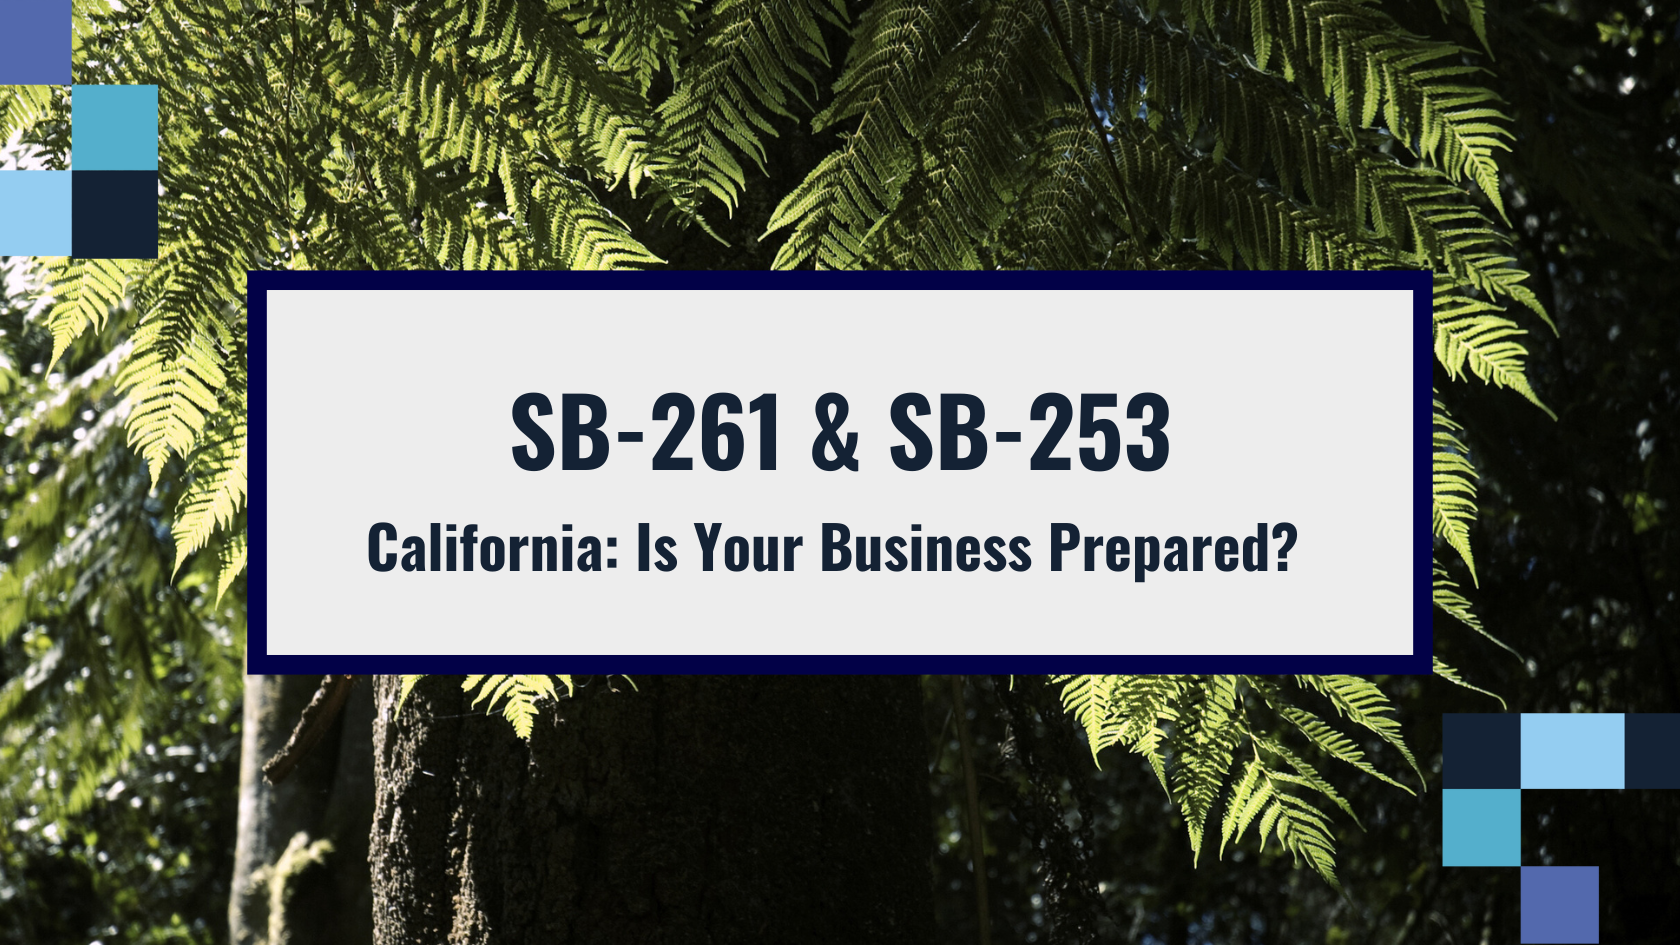 Tempus - California: Is Your Business Prepared for SB-261 and SB-253